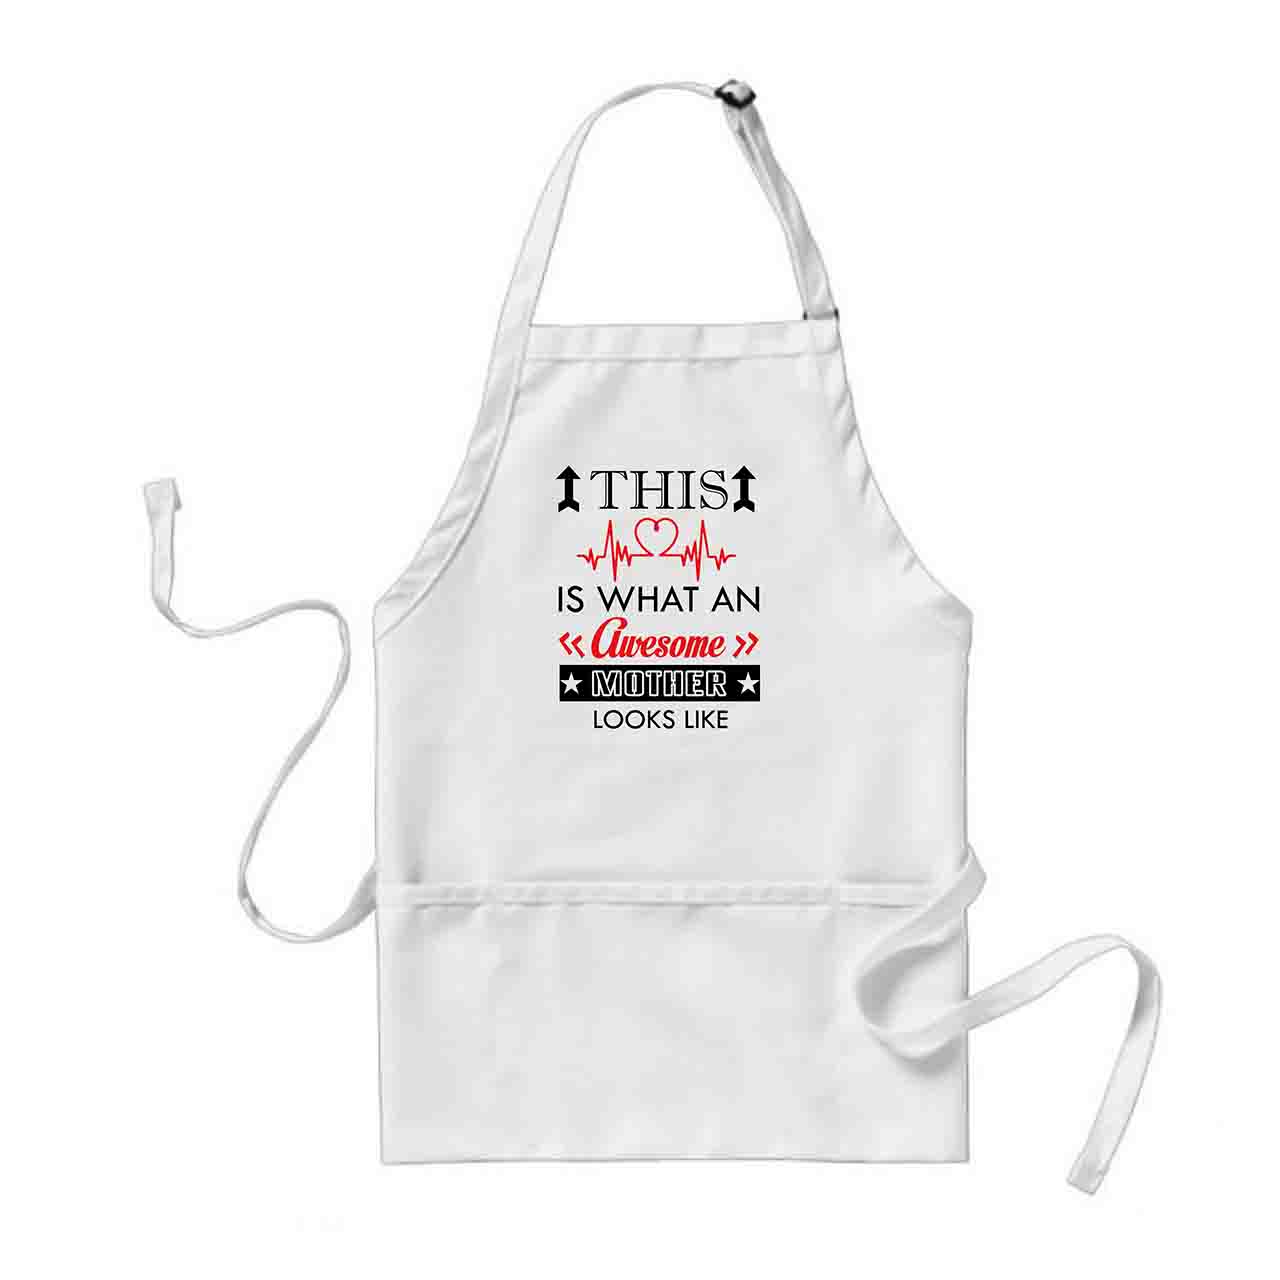 PERSONALIZED APRON GIFT FOR MOM ON MOTHER’S DAY (Design 6)